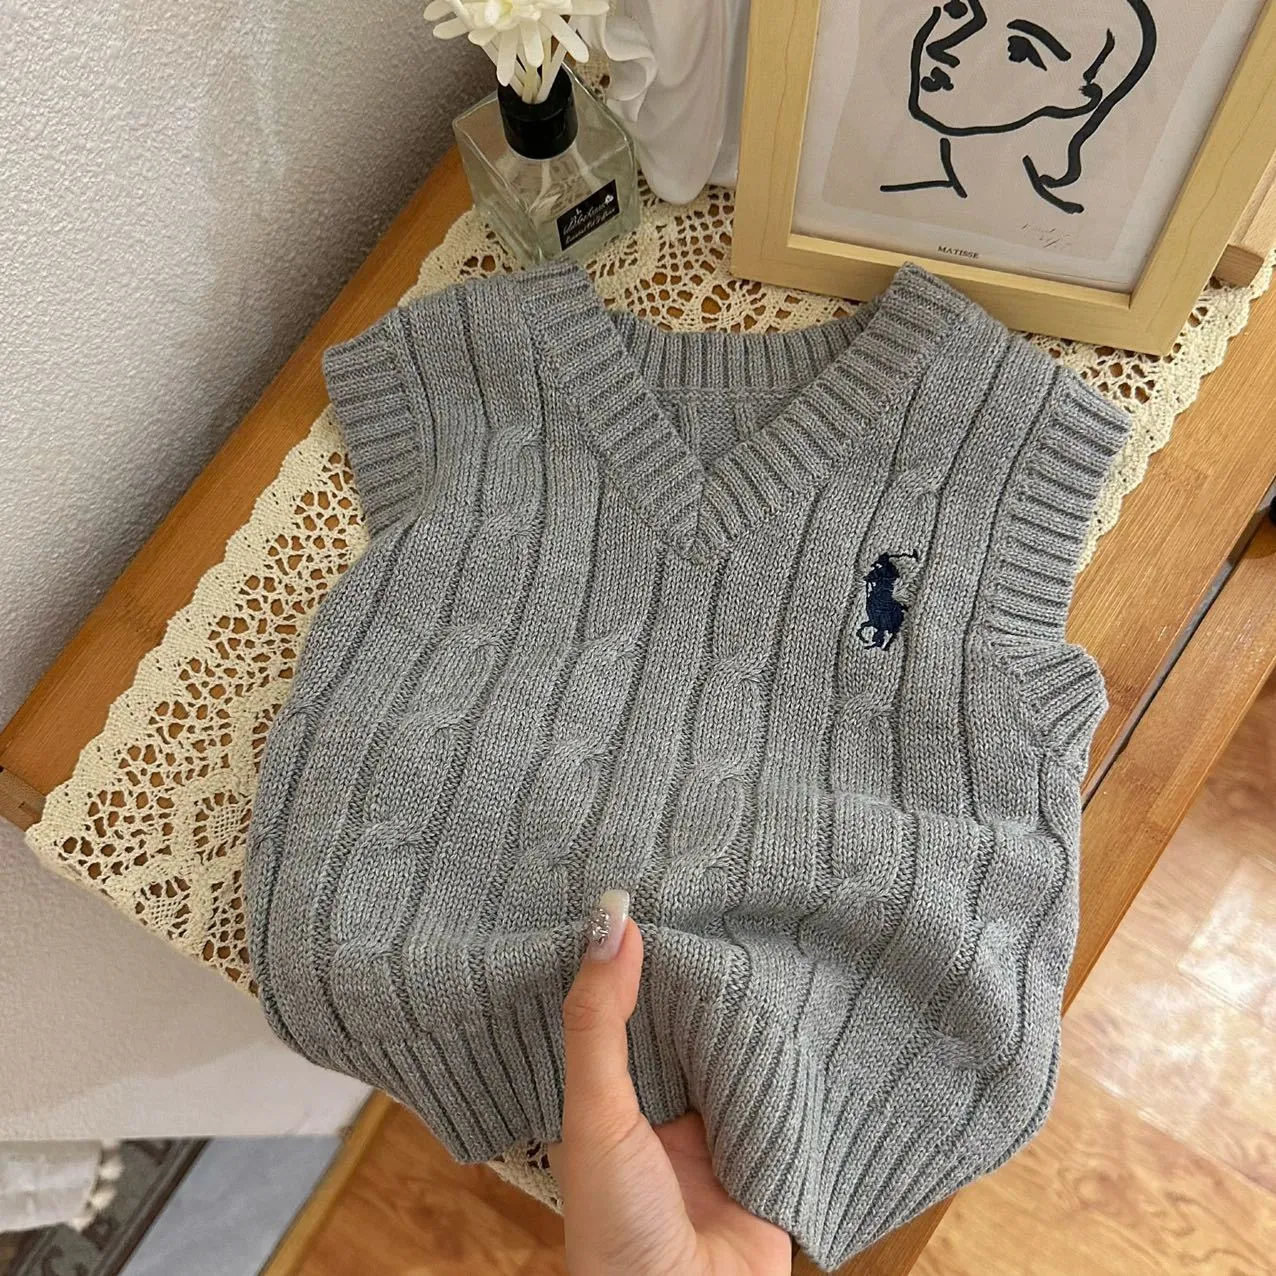 Children Sweater Vest Thick Needle Sleeveless Pullover V-Neck Knitting Sweater Tops Thread Trimming Boys Sweater 2-7T